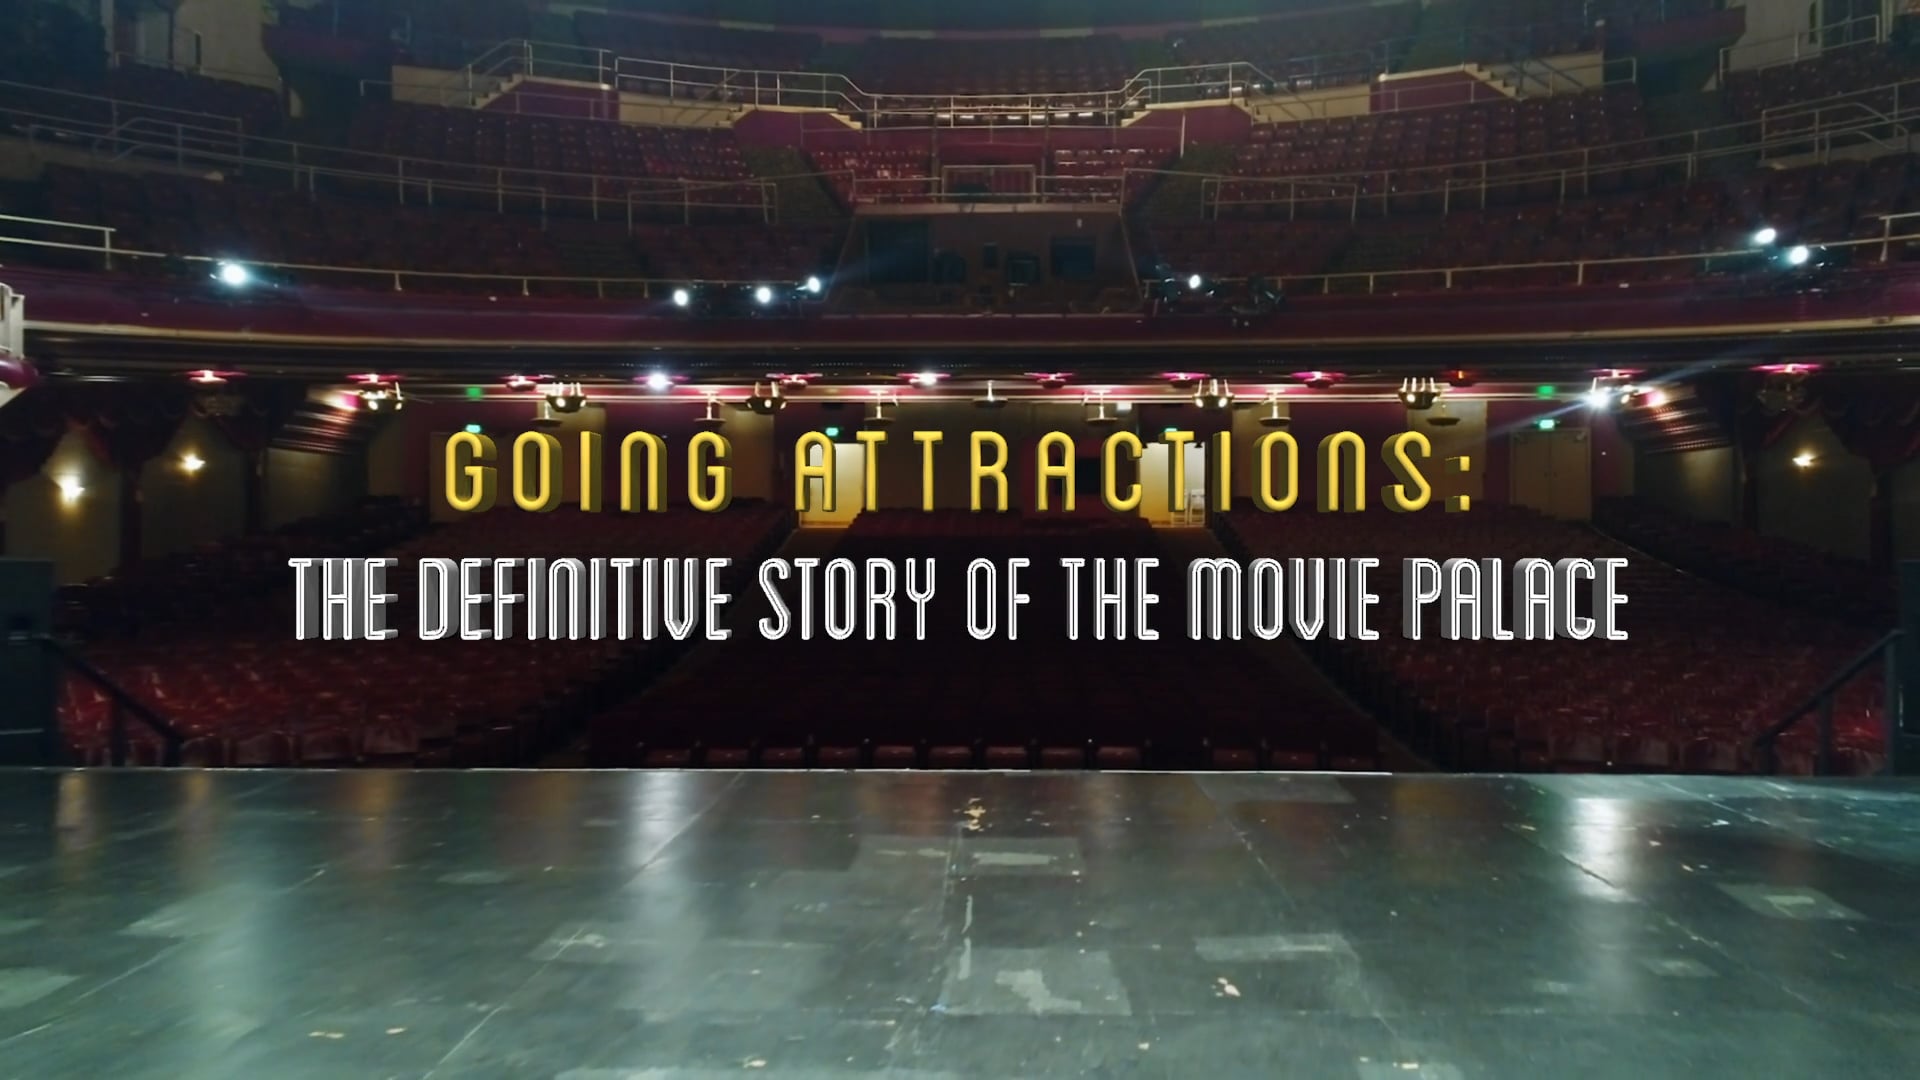 Going Attractions: The Definitive Story of the Movie Palace | Official Trailer